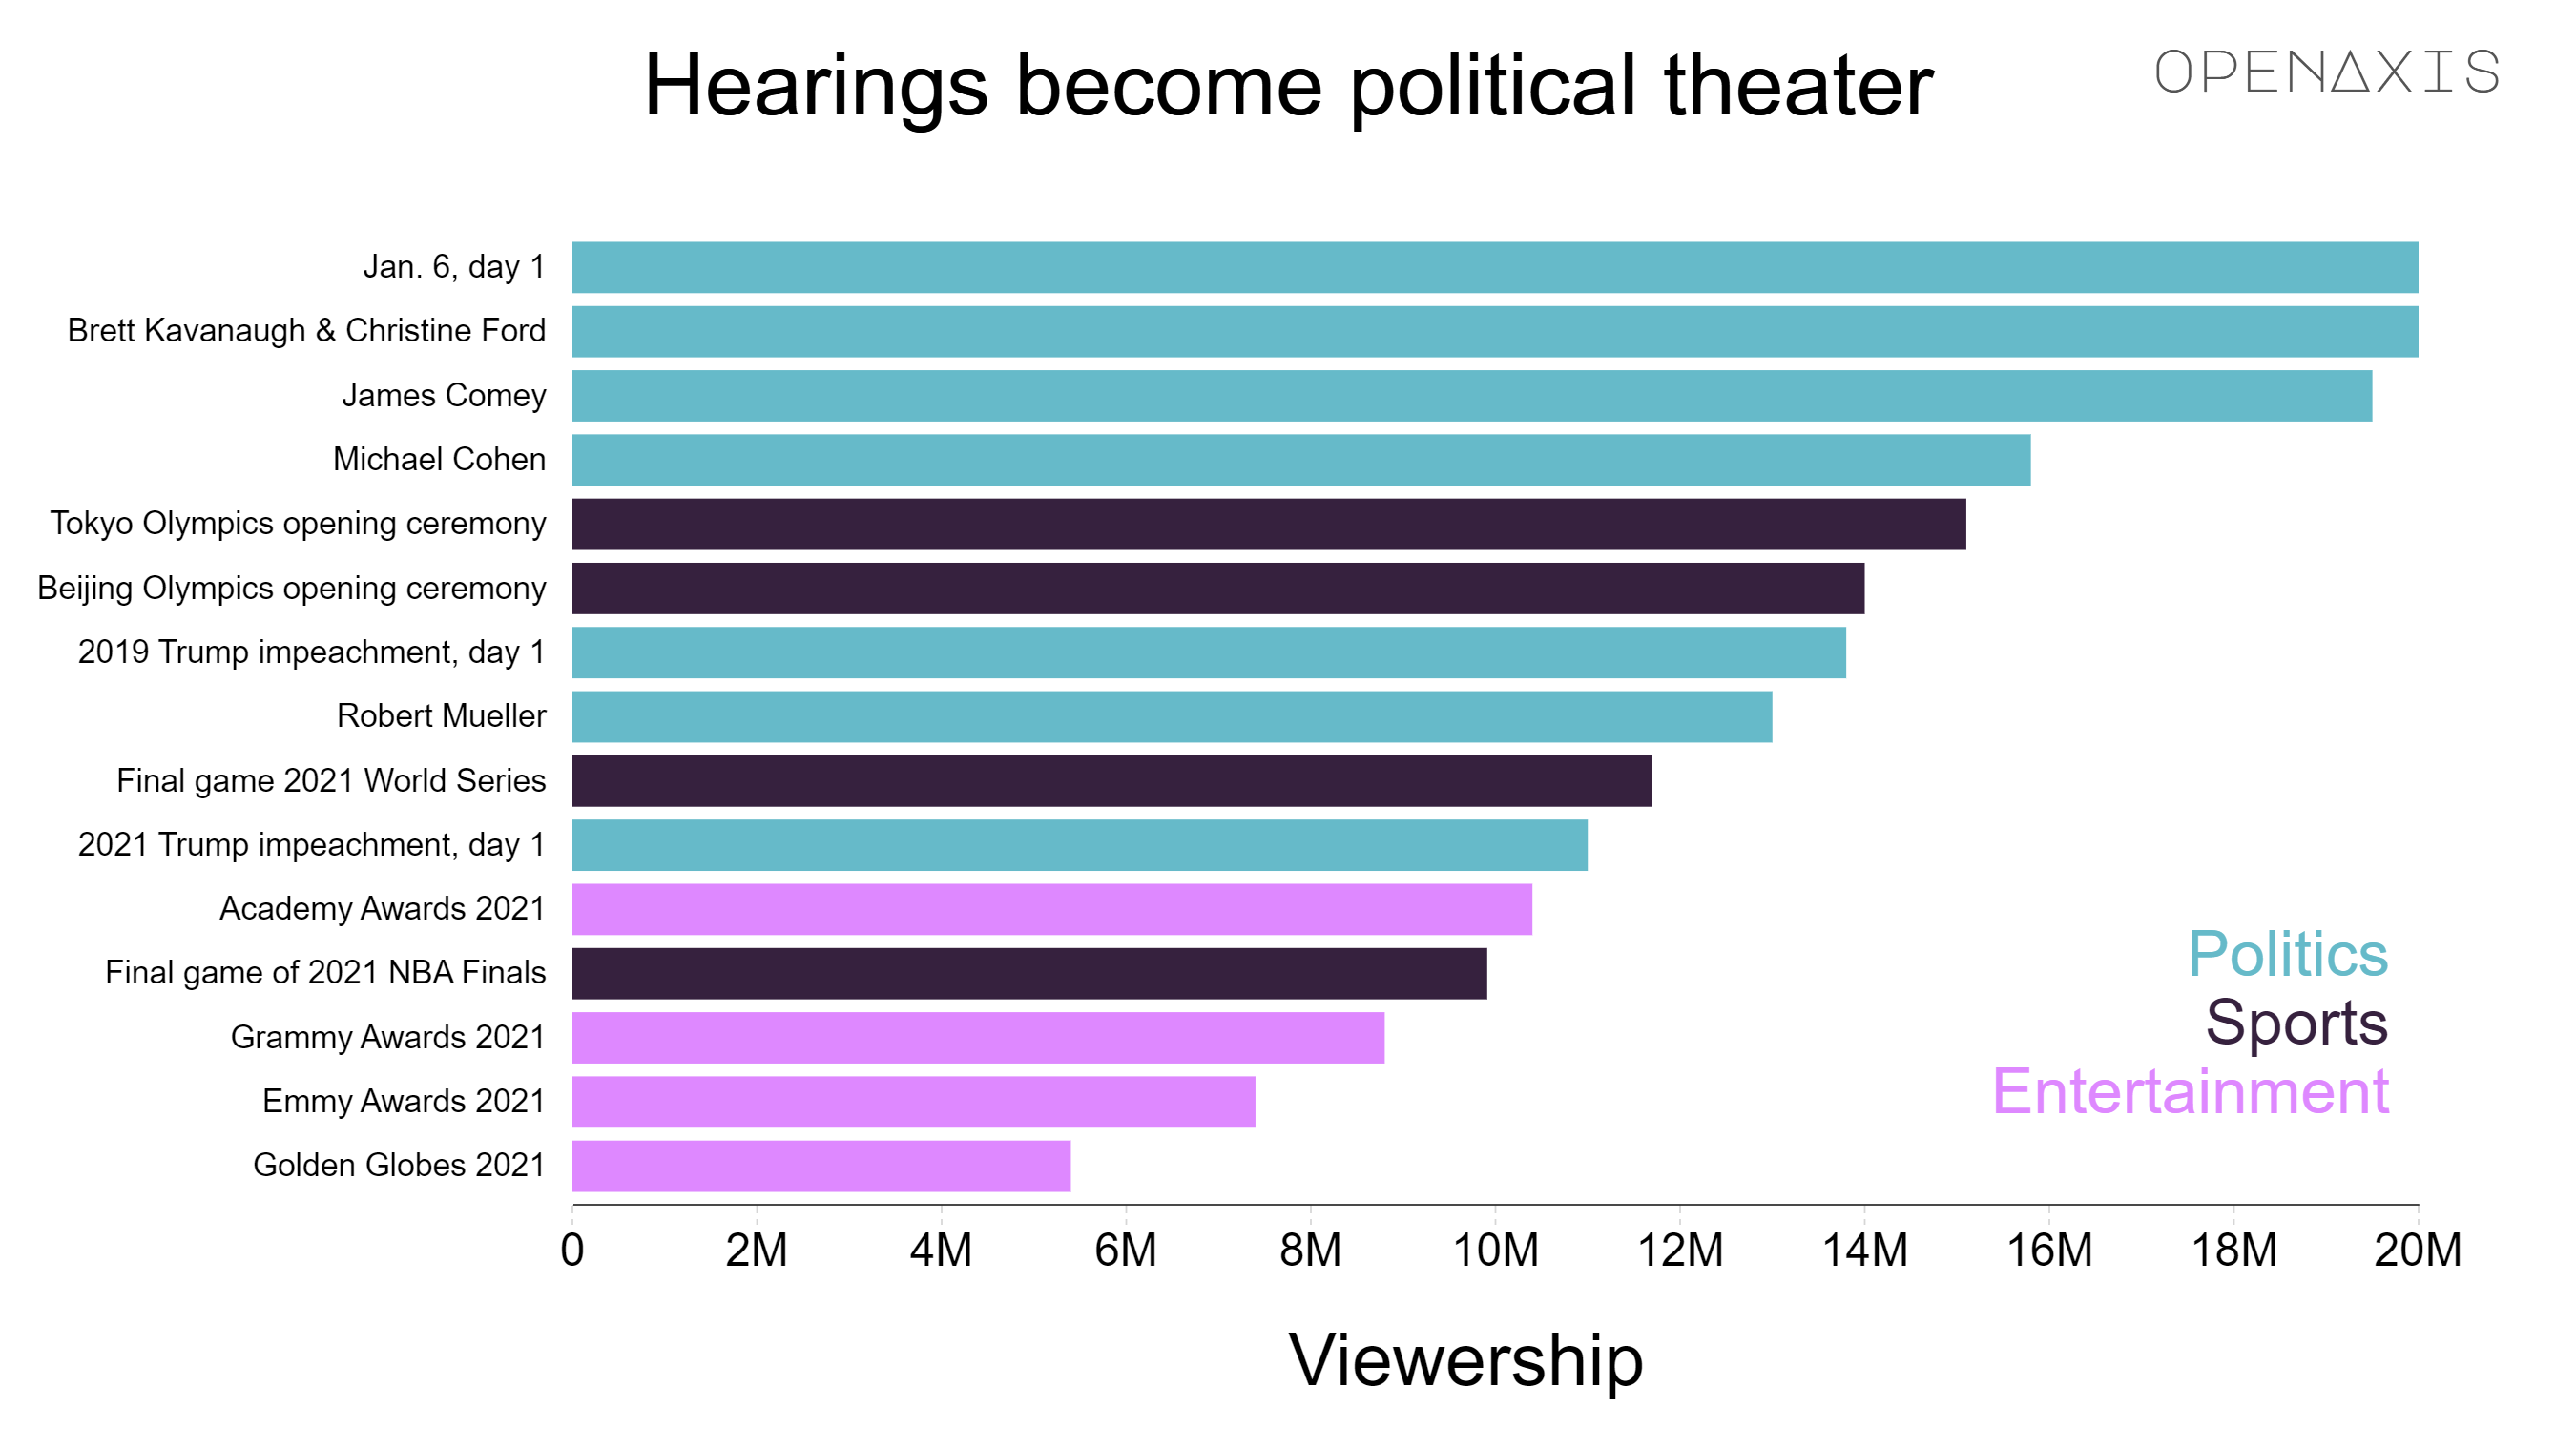 "Hearings become political theater"